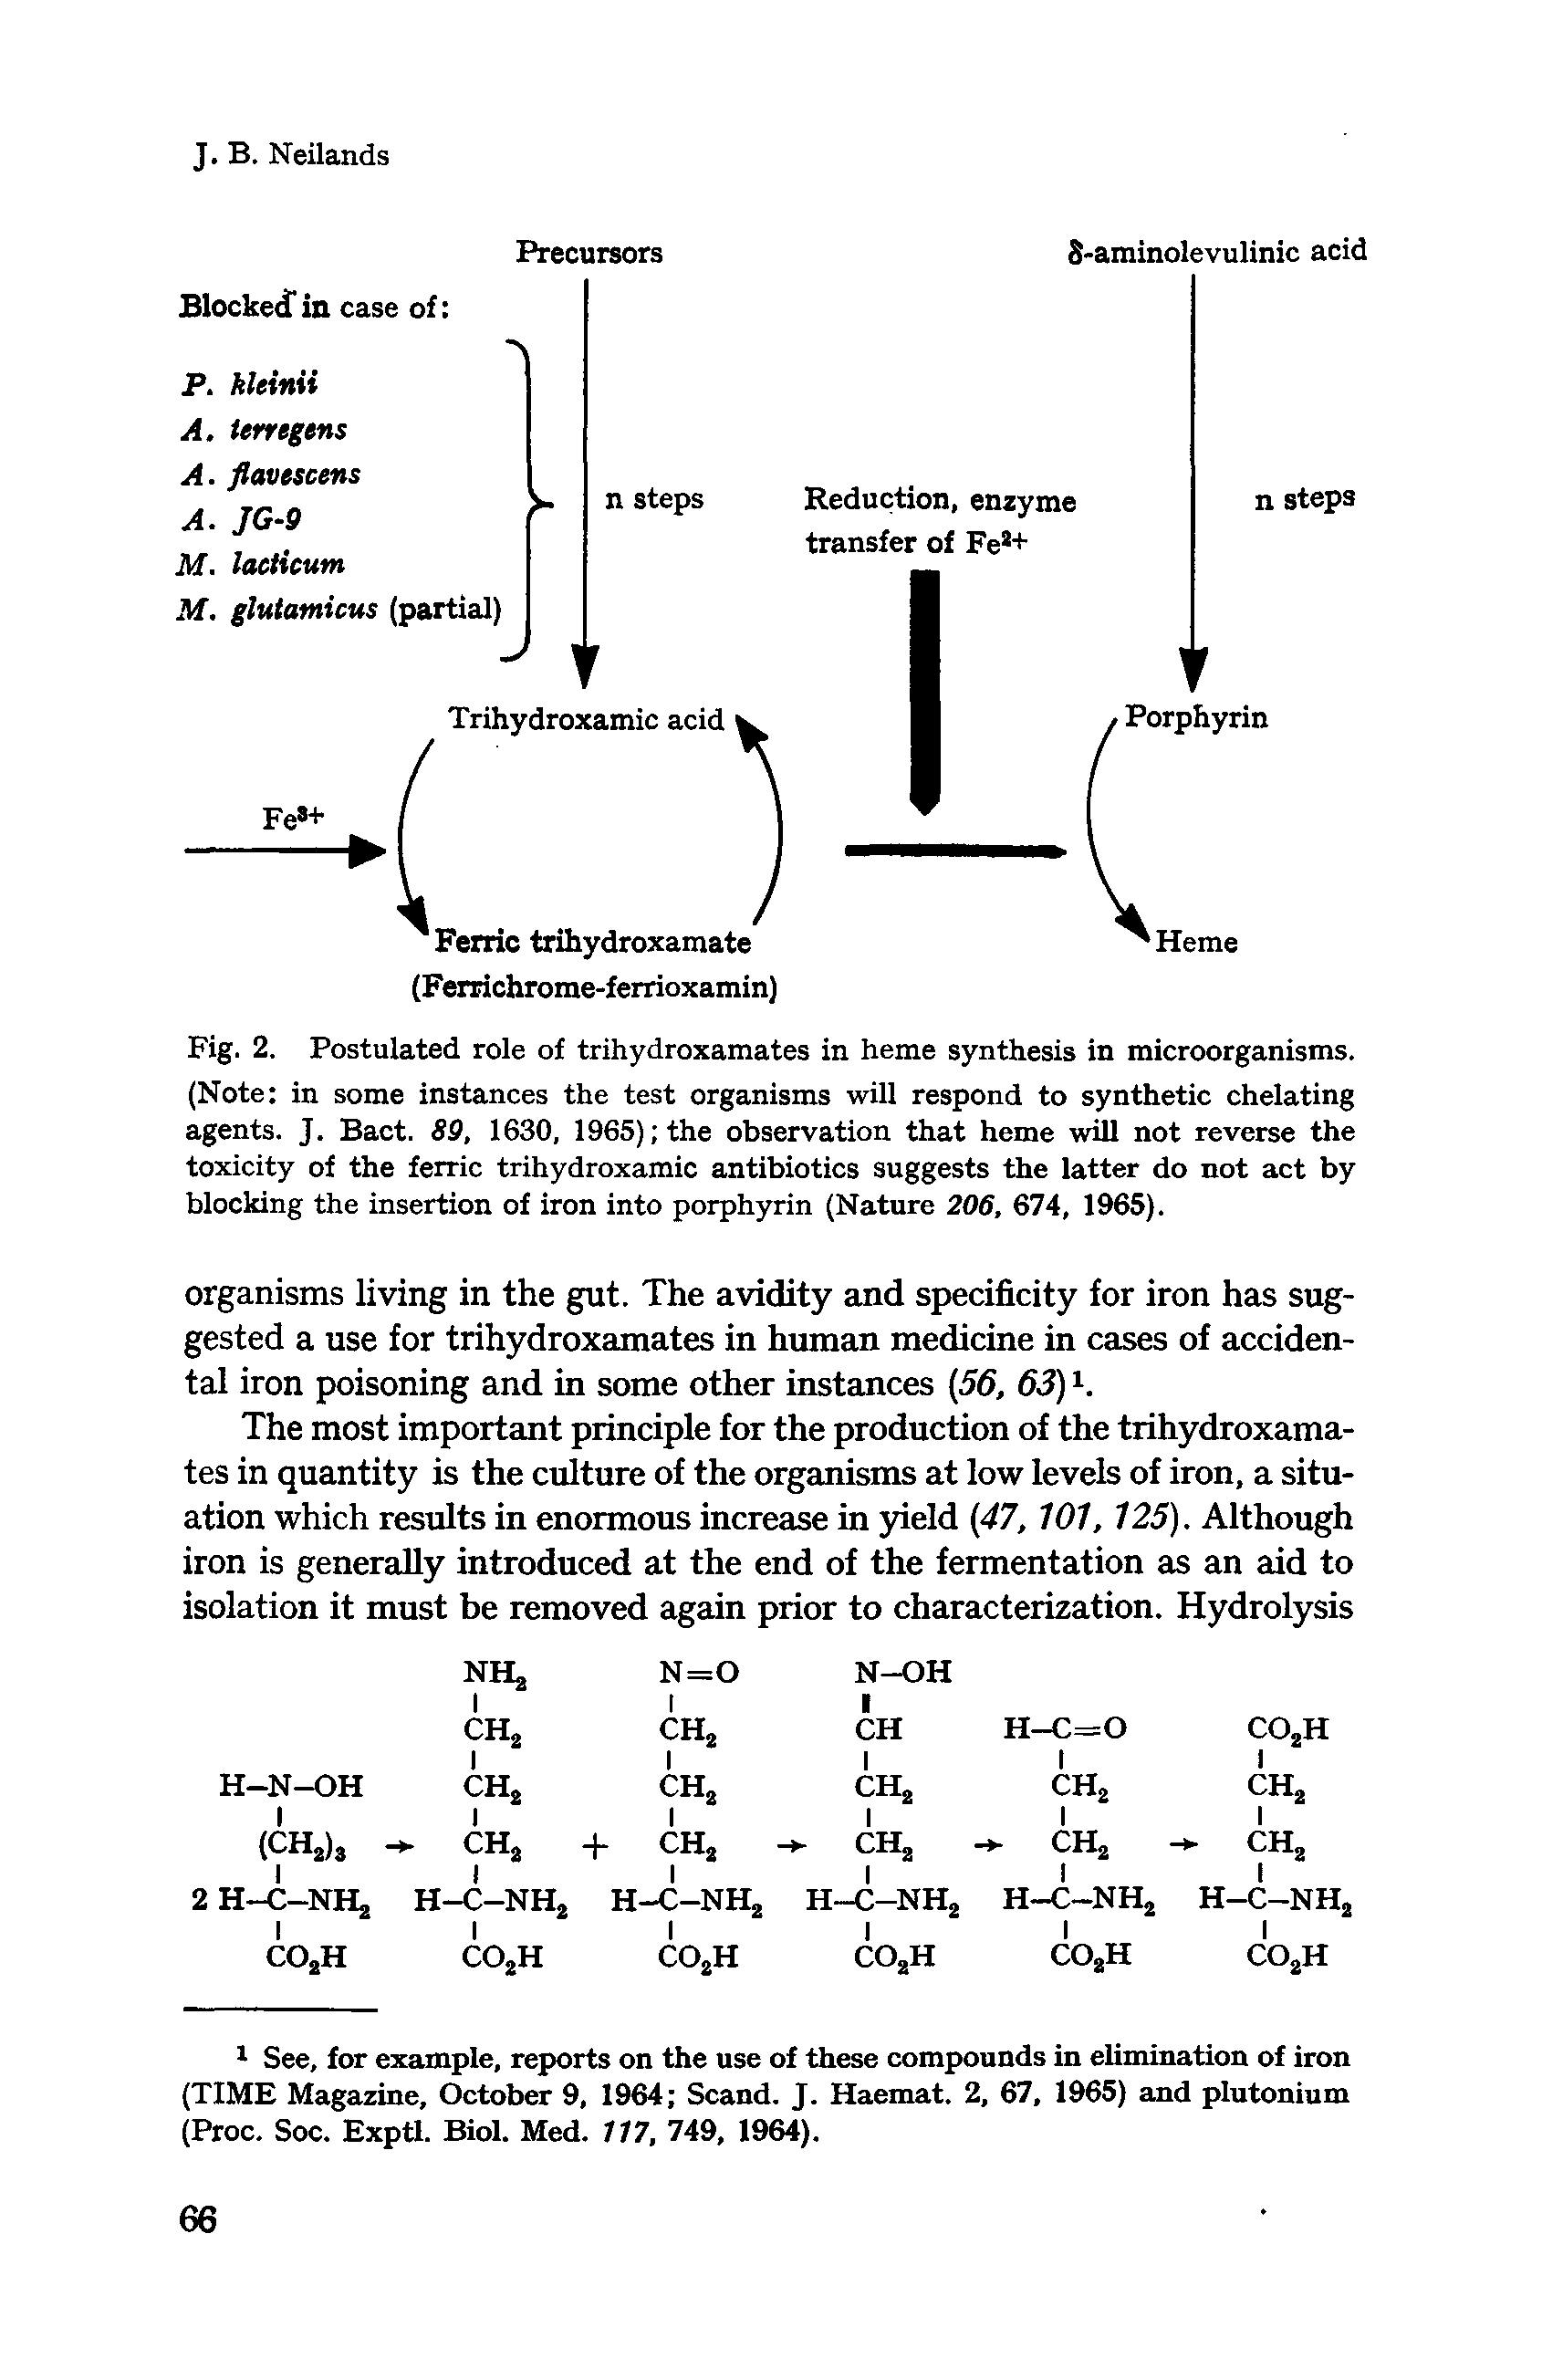 Fig. 2. Postulated role of trihydroxamates in heme synthesis in microorganisms. (Note in some instances the test organisms will respond to synthetic chelating agents. J. Bact. 89, 1630, 1965) the observation that heme will not reverse the toxicity of the ferric trihydroxamic antibiotics suggests the latter do not act by blocking the insertion of iron into porphyrin (Nature 208, 674, 1965).